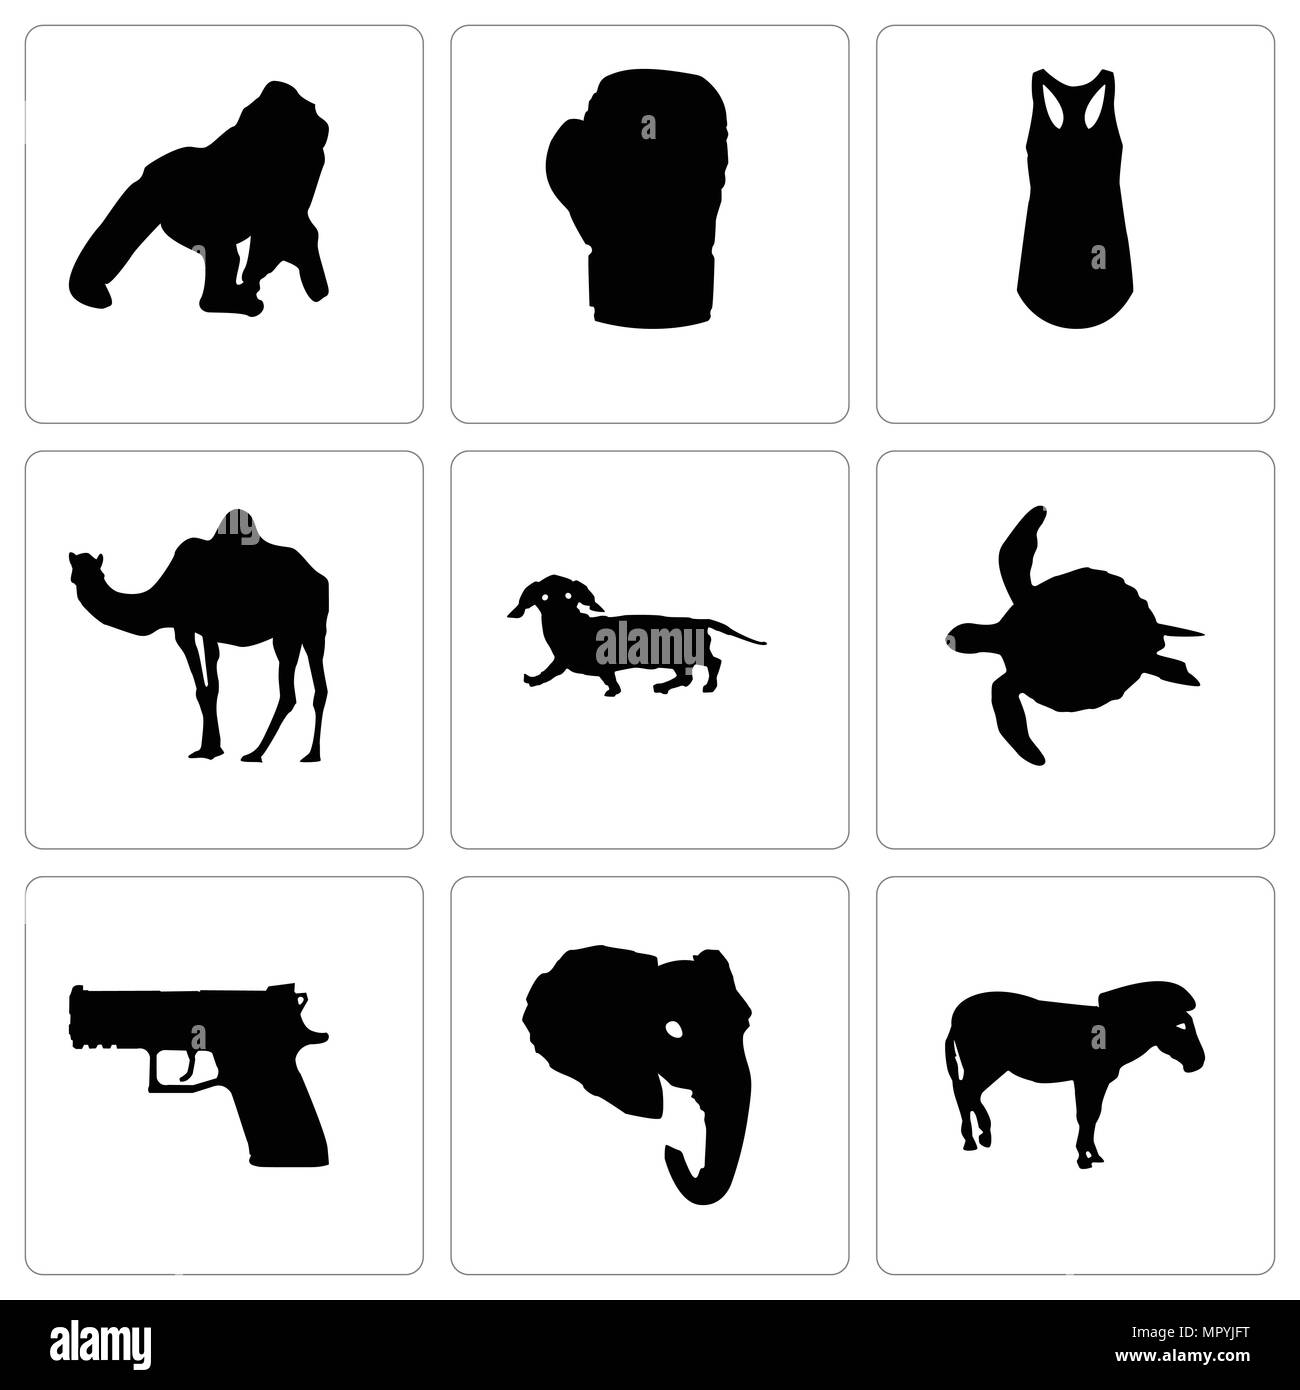 Set Of 9 simple editable icons such as zebra, elephant head, handgun, sea turtle, dachshund, camel, tank top, boxing glove, gorilla, can be used for m Stock Vector